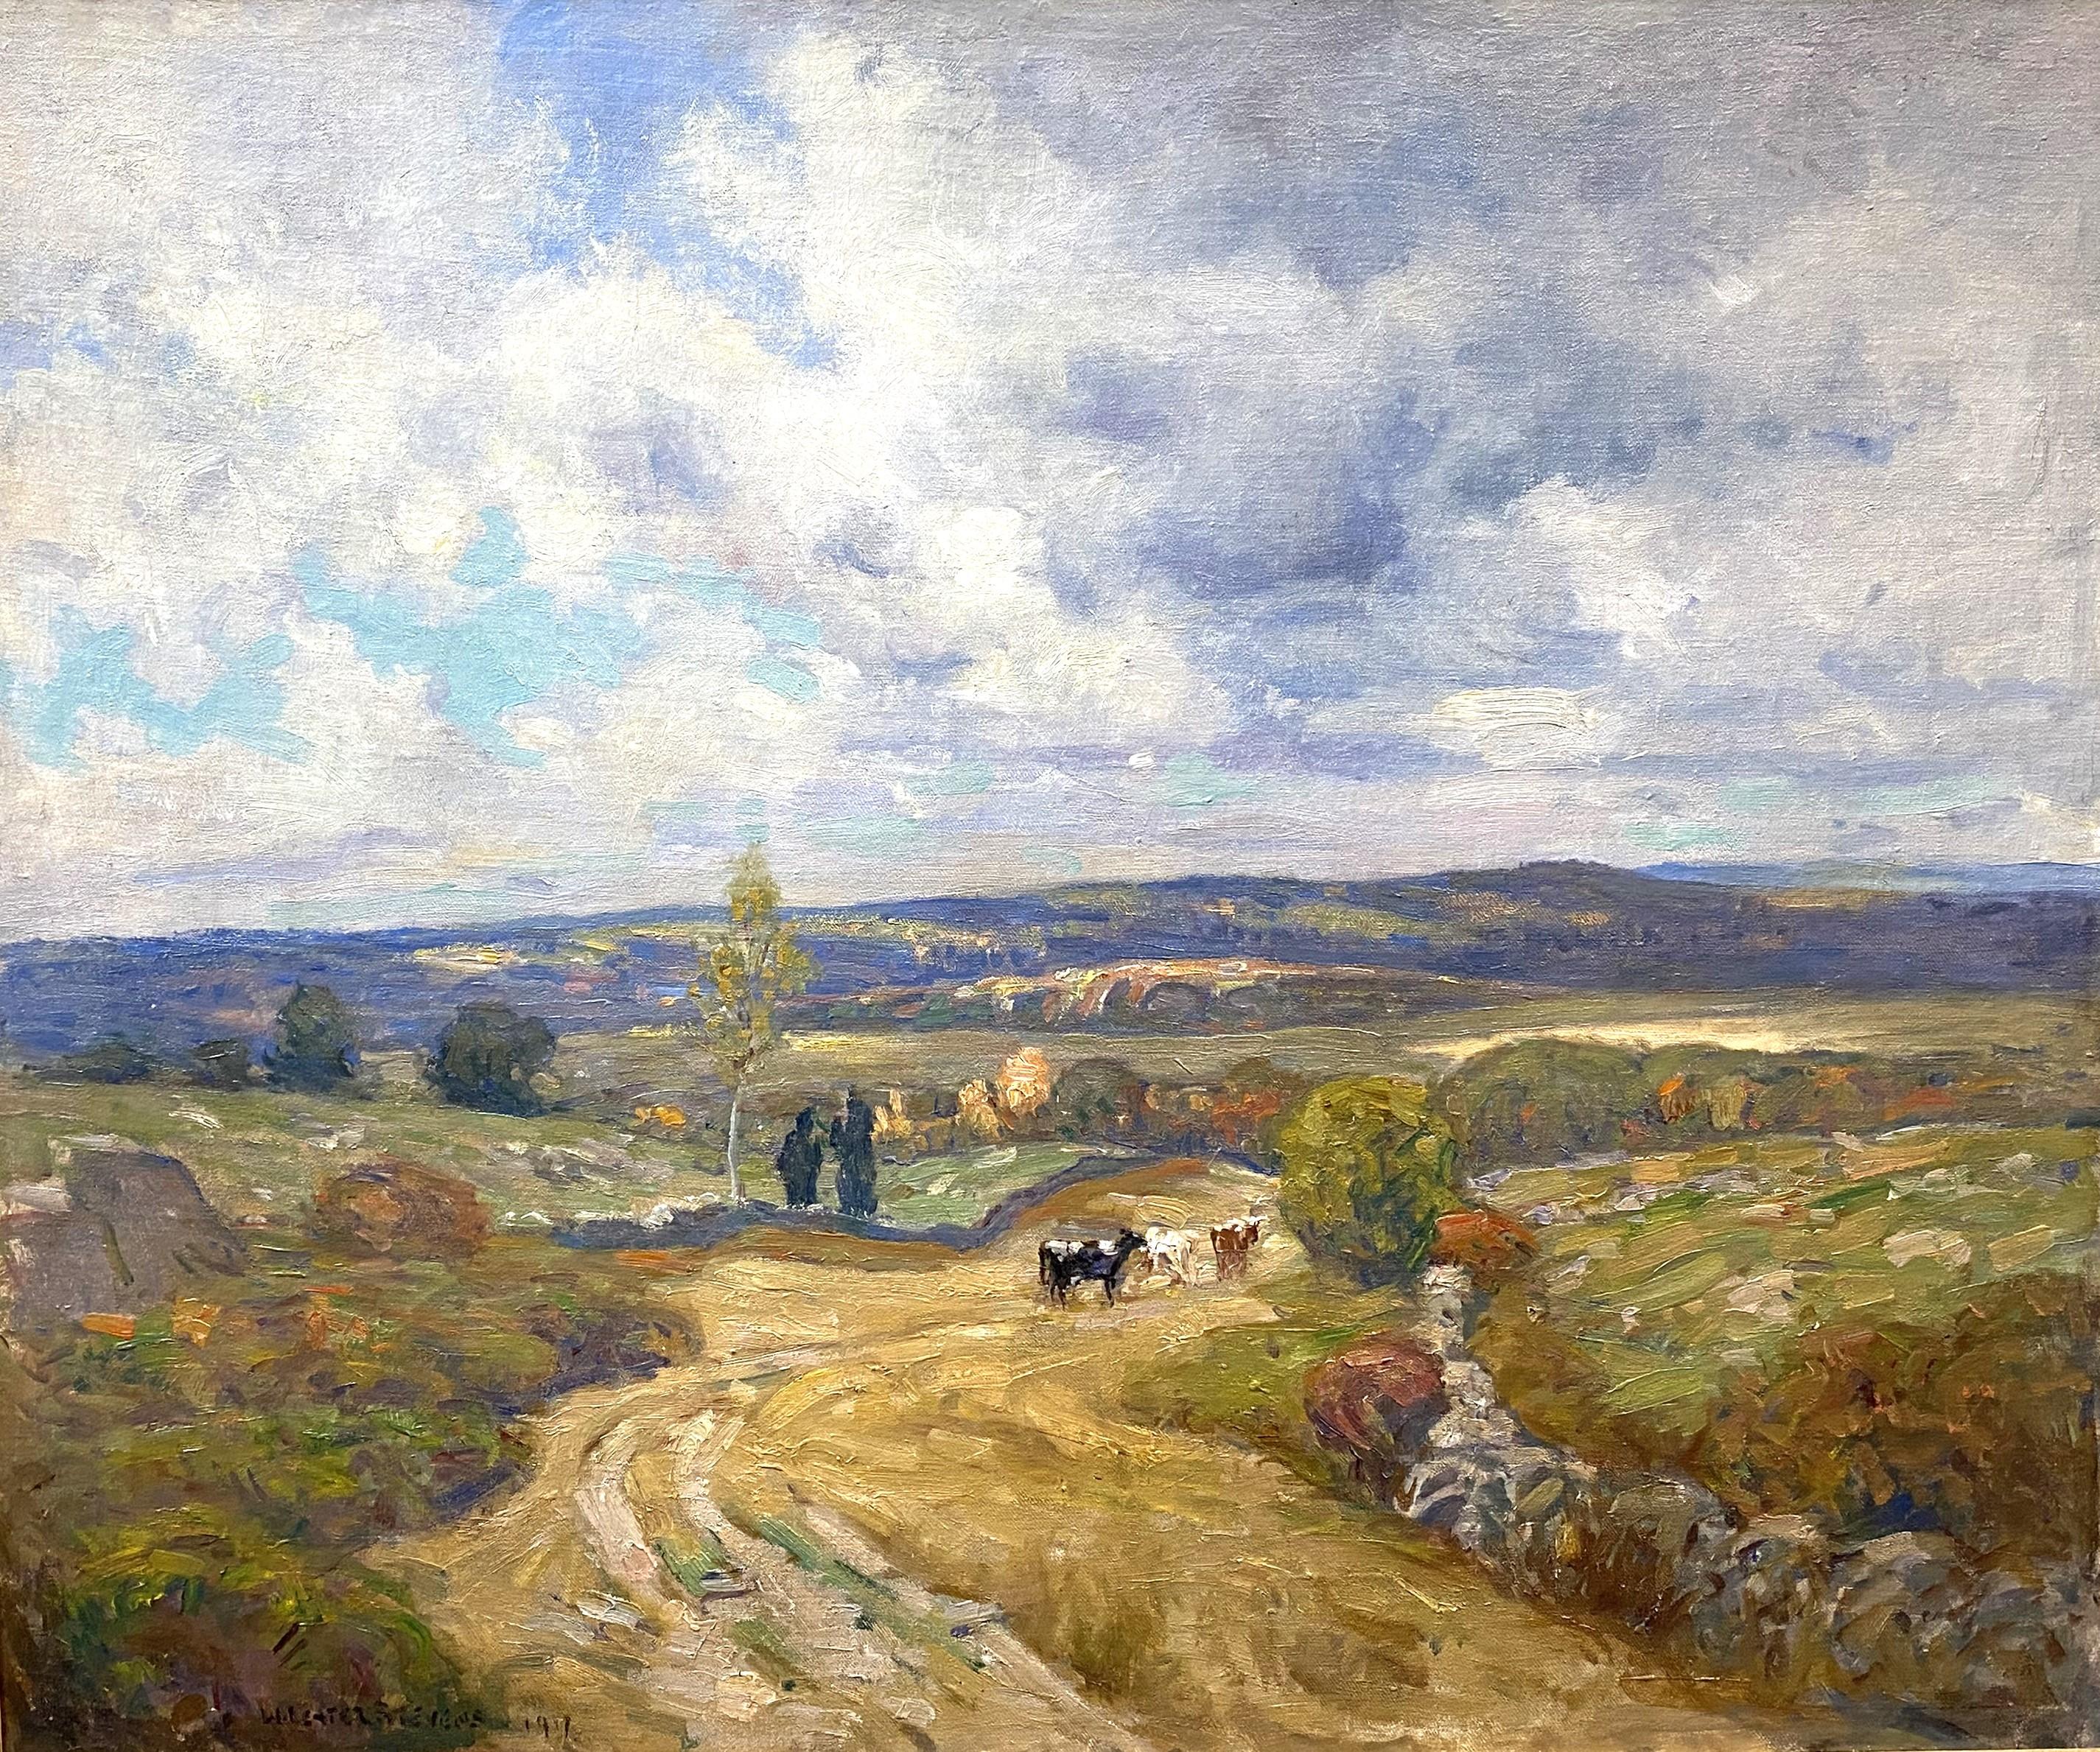 Connecticut River Valley - American Impressionist Art by William Lester Stevens